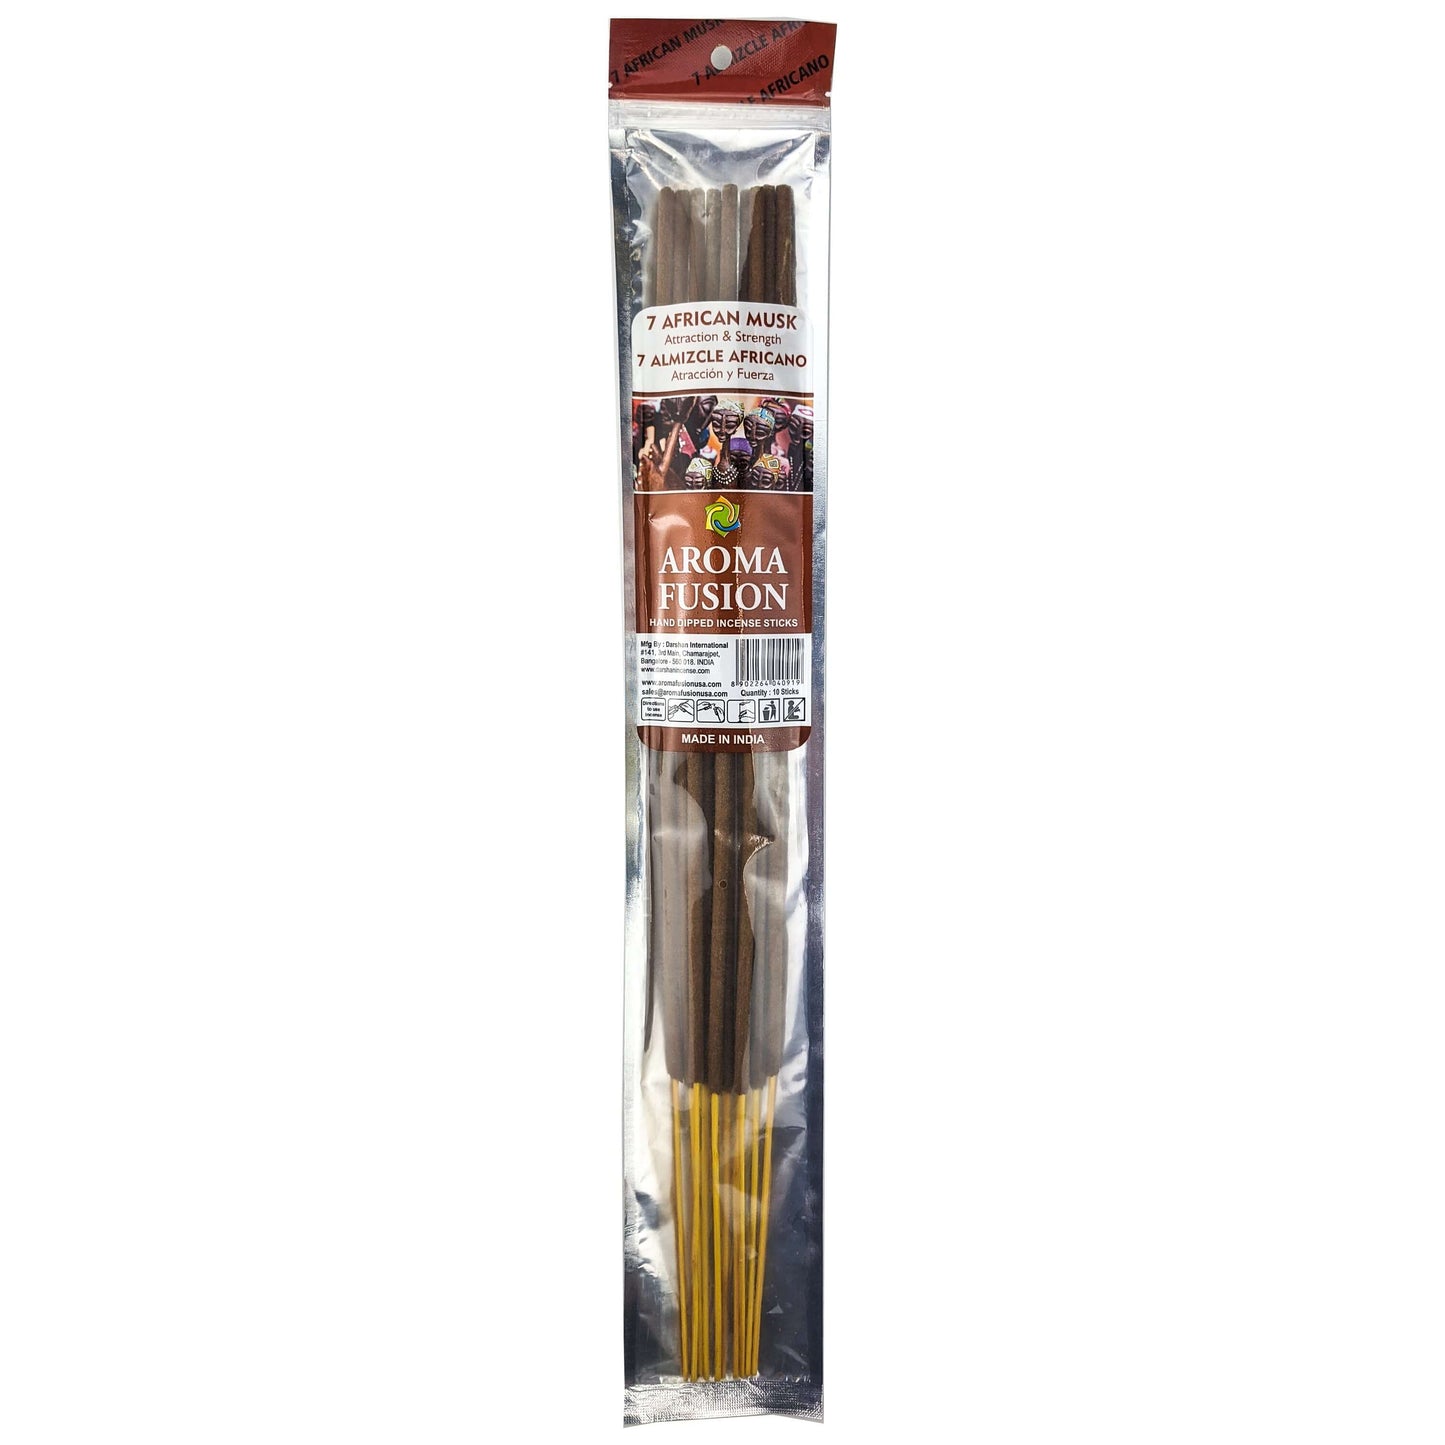 7 African Musk Scent Aroma Fusion 19" Jumbo Incense, 10-Stick Pack